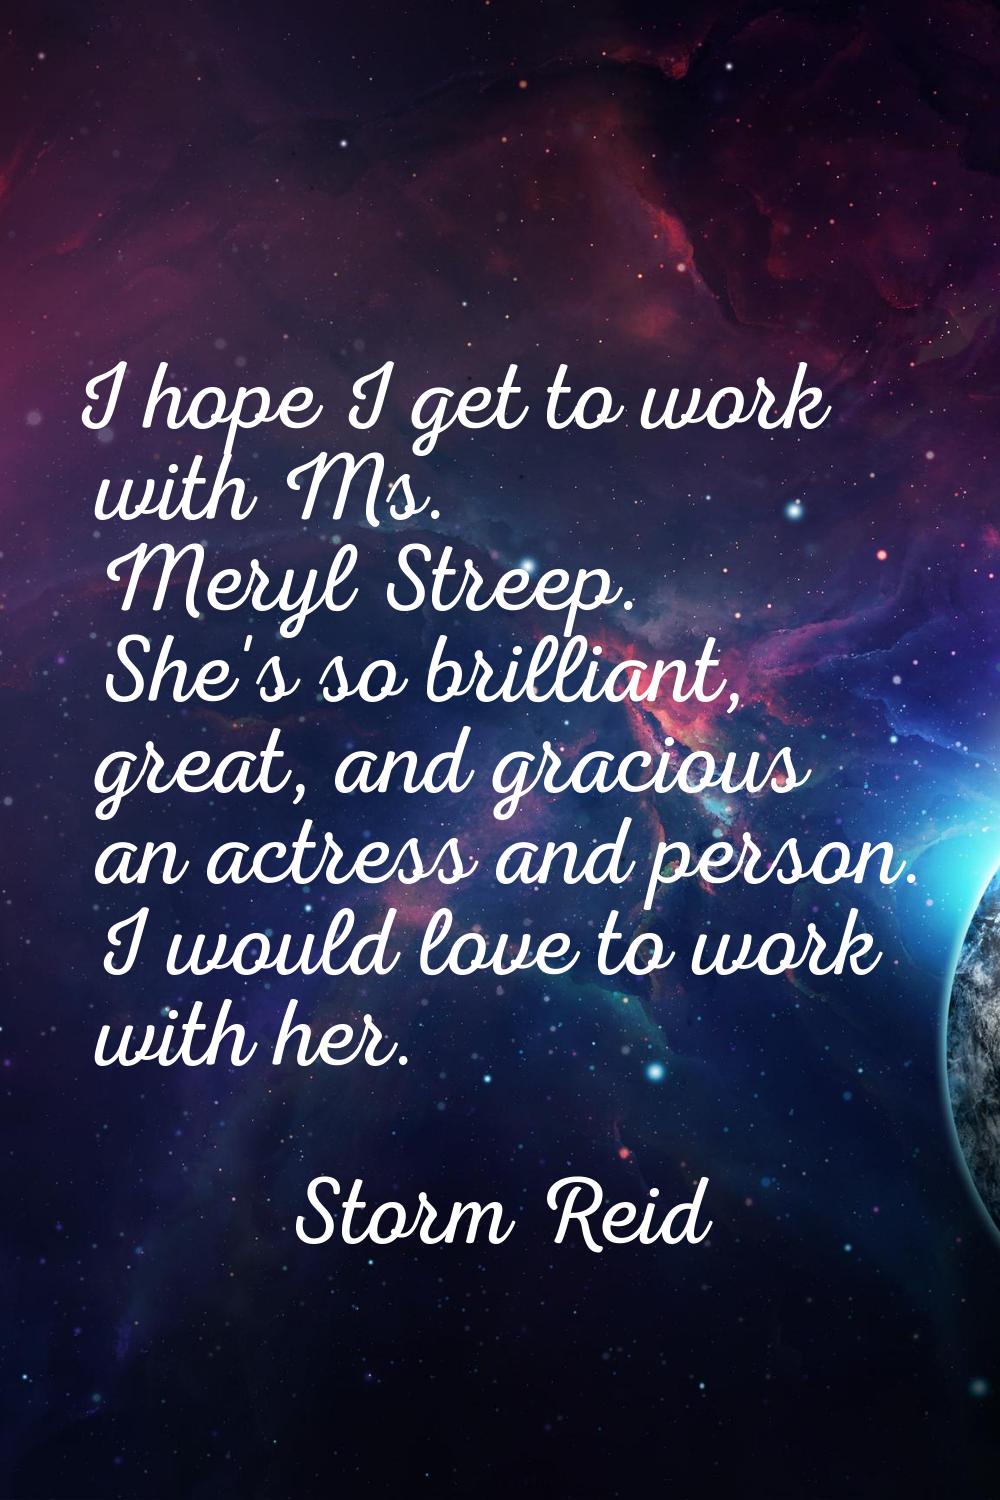 I hope I get to work with Ms. Meryl Streep. She's so brilliant, great, and gracious an actress and 